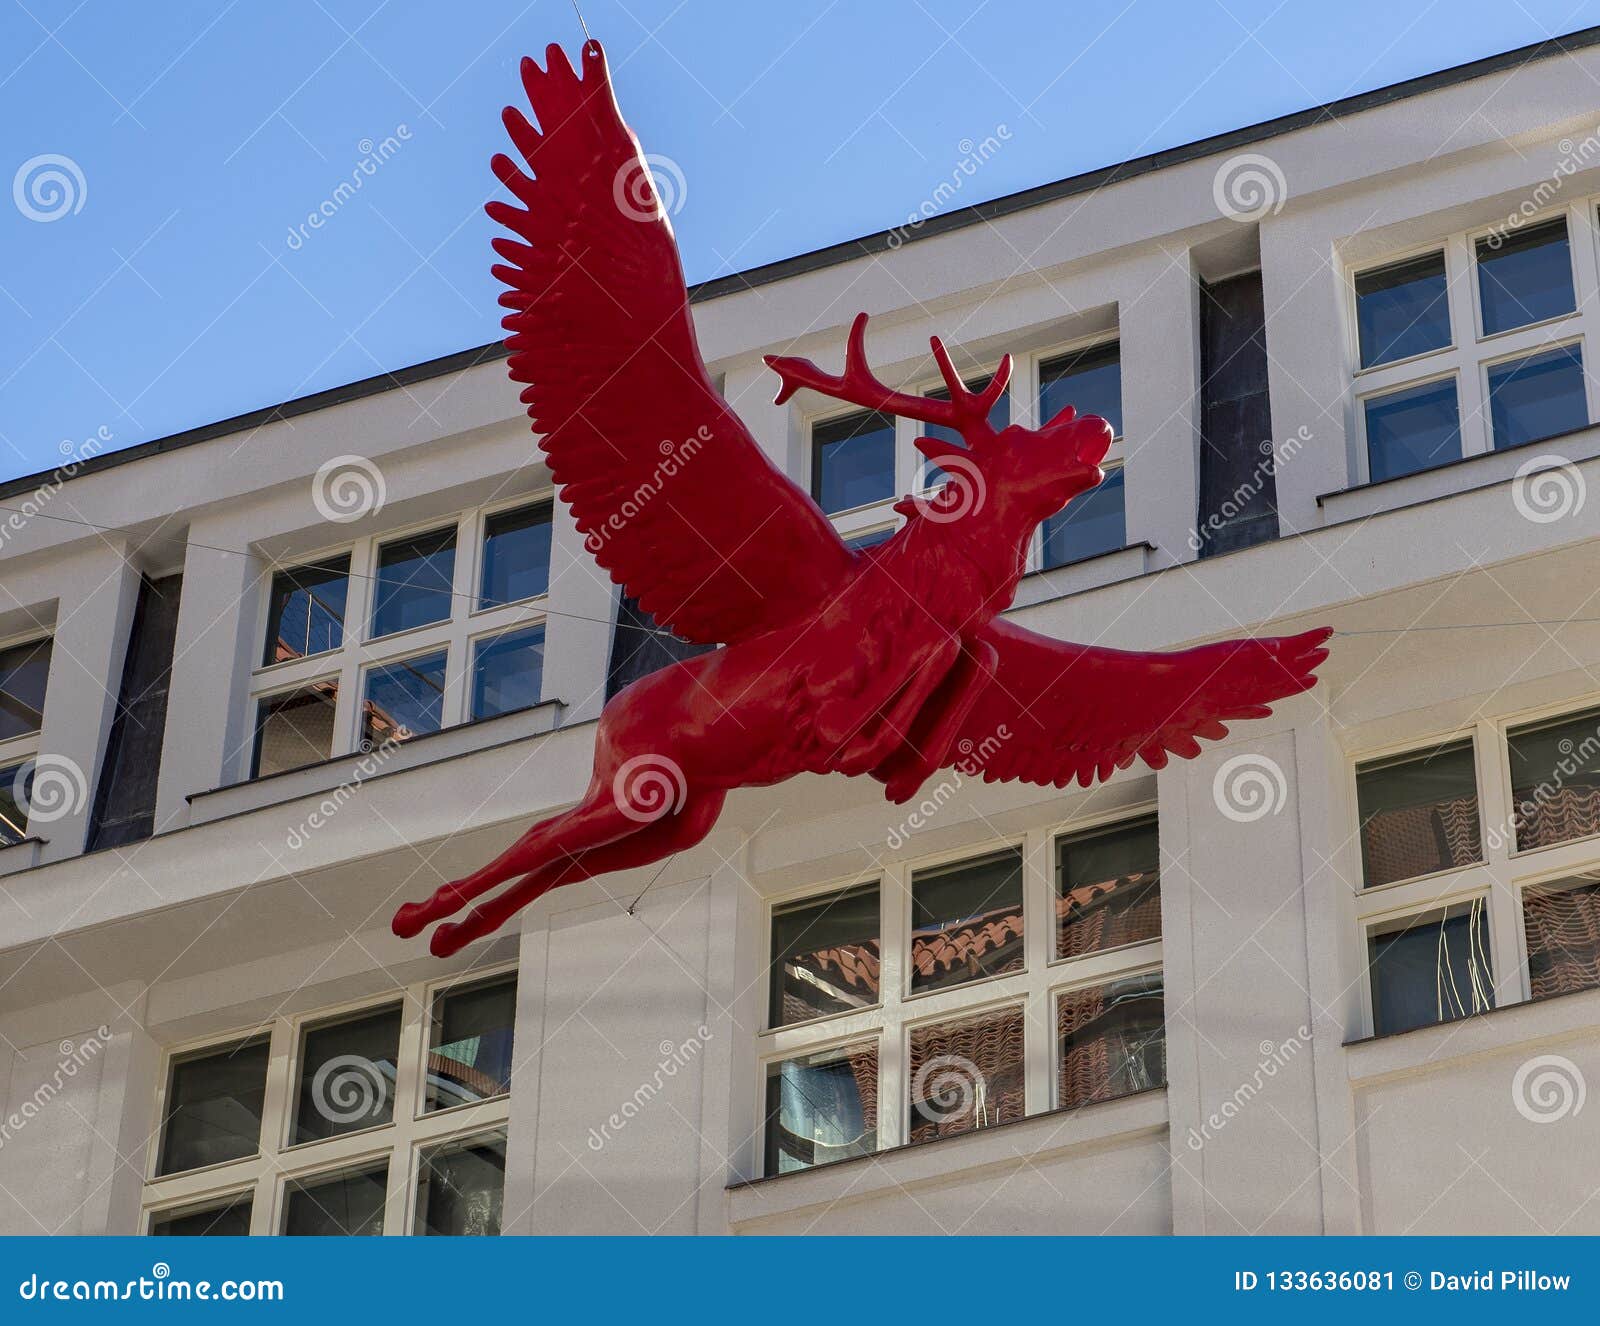 donor Hylde Uhøfligt Statue of a Red Elk with Wings Flying through the Air, Prague, Czech  Republic Editorial Photo - Image of republic, horns: 133636081